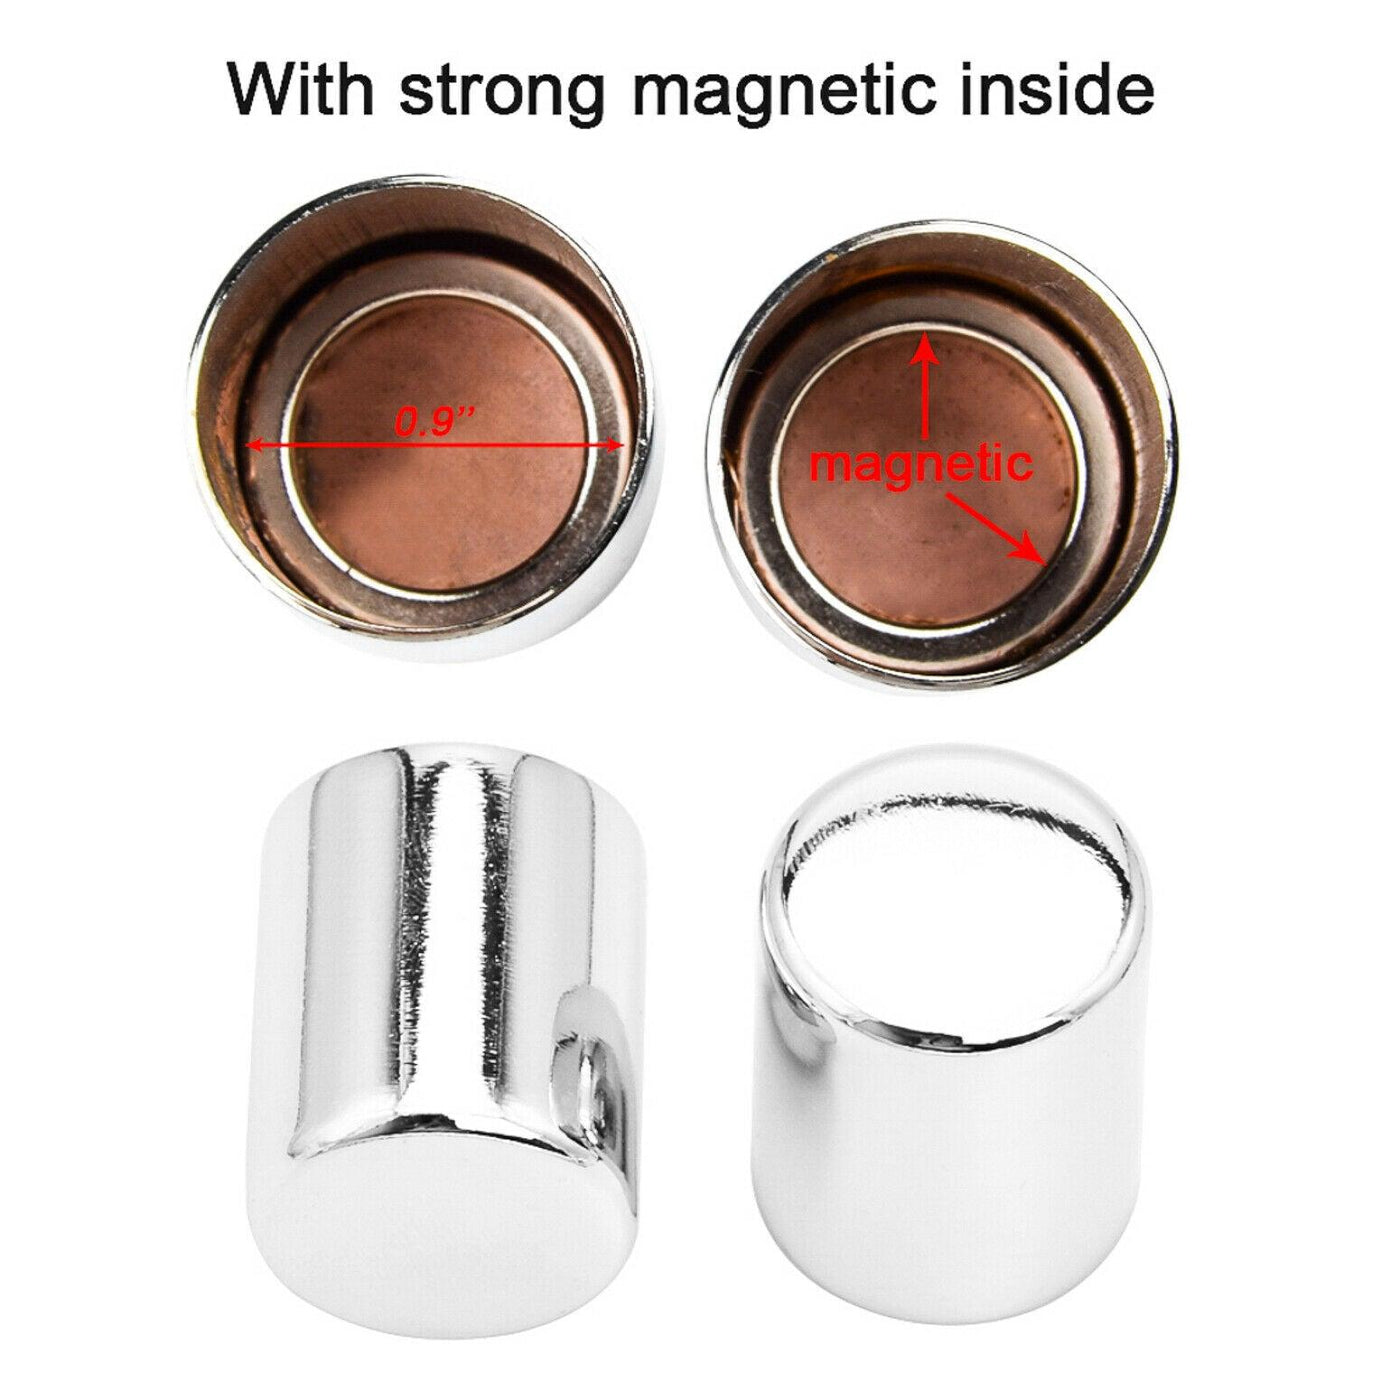 2 Pairs Chrome Metal Docking Hardware Point Covers Fit for Harley Street Glide - Moto Life Products